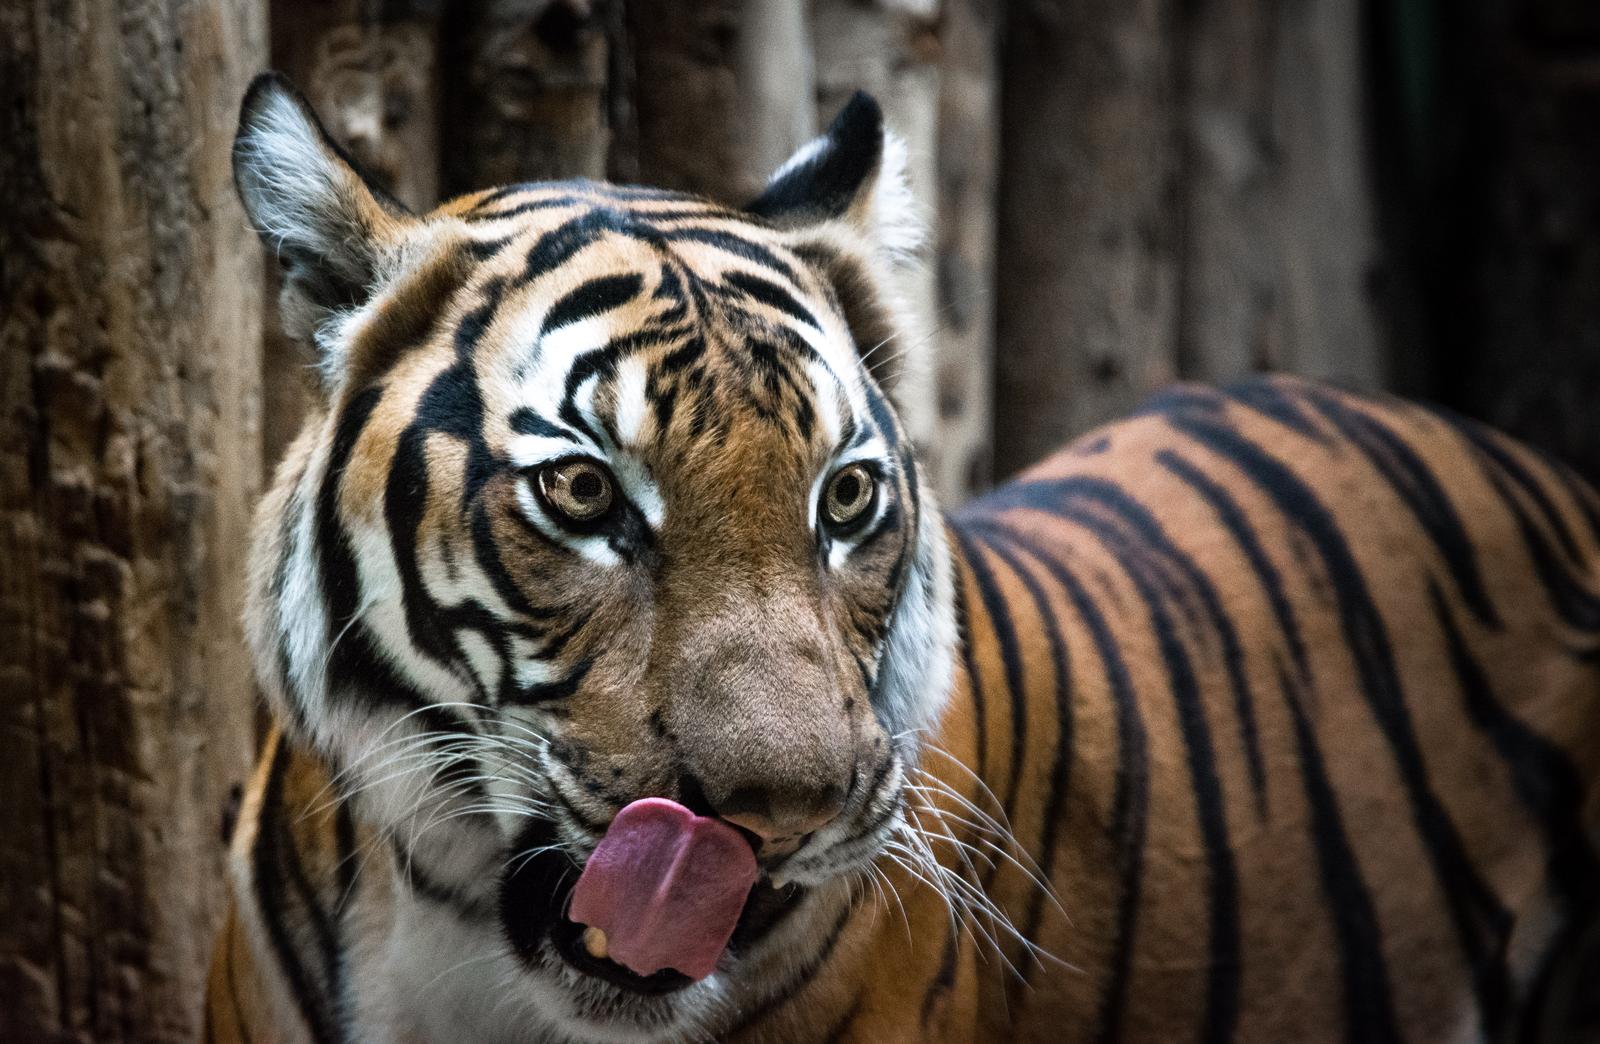 I’ll Be Gobsmacked If You Can Score at Least 15/20 on This Tricky Synonyms and Antonyms Quiz Hungry tiger